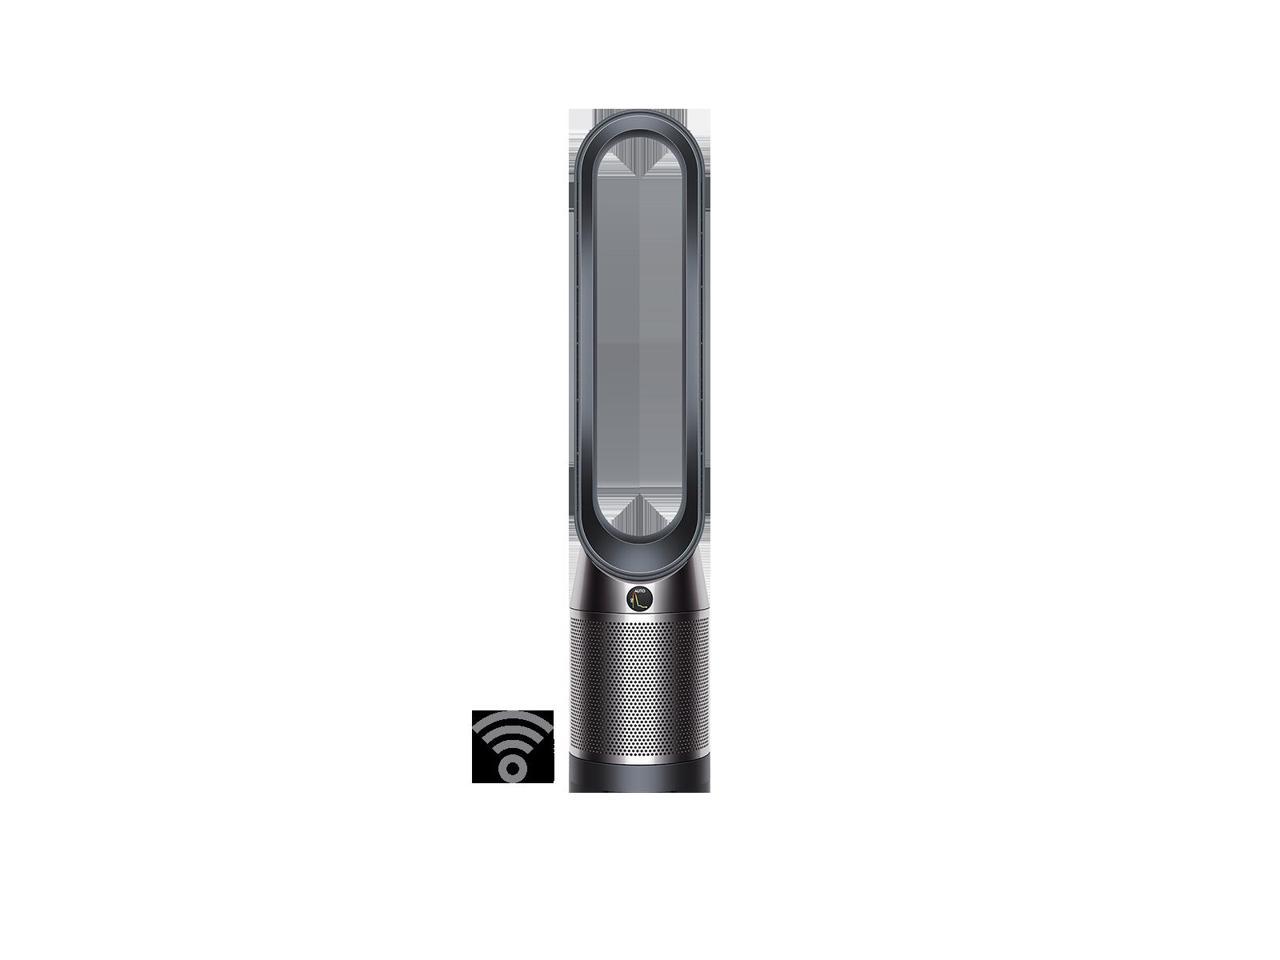 Refurbished: Dyson TP04 Pure Coolâ¢ Connected Air Purifier | Black - Newegg.com